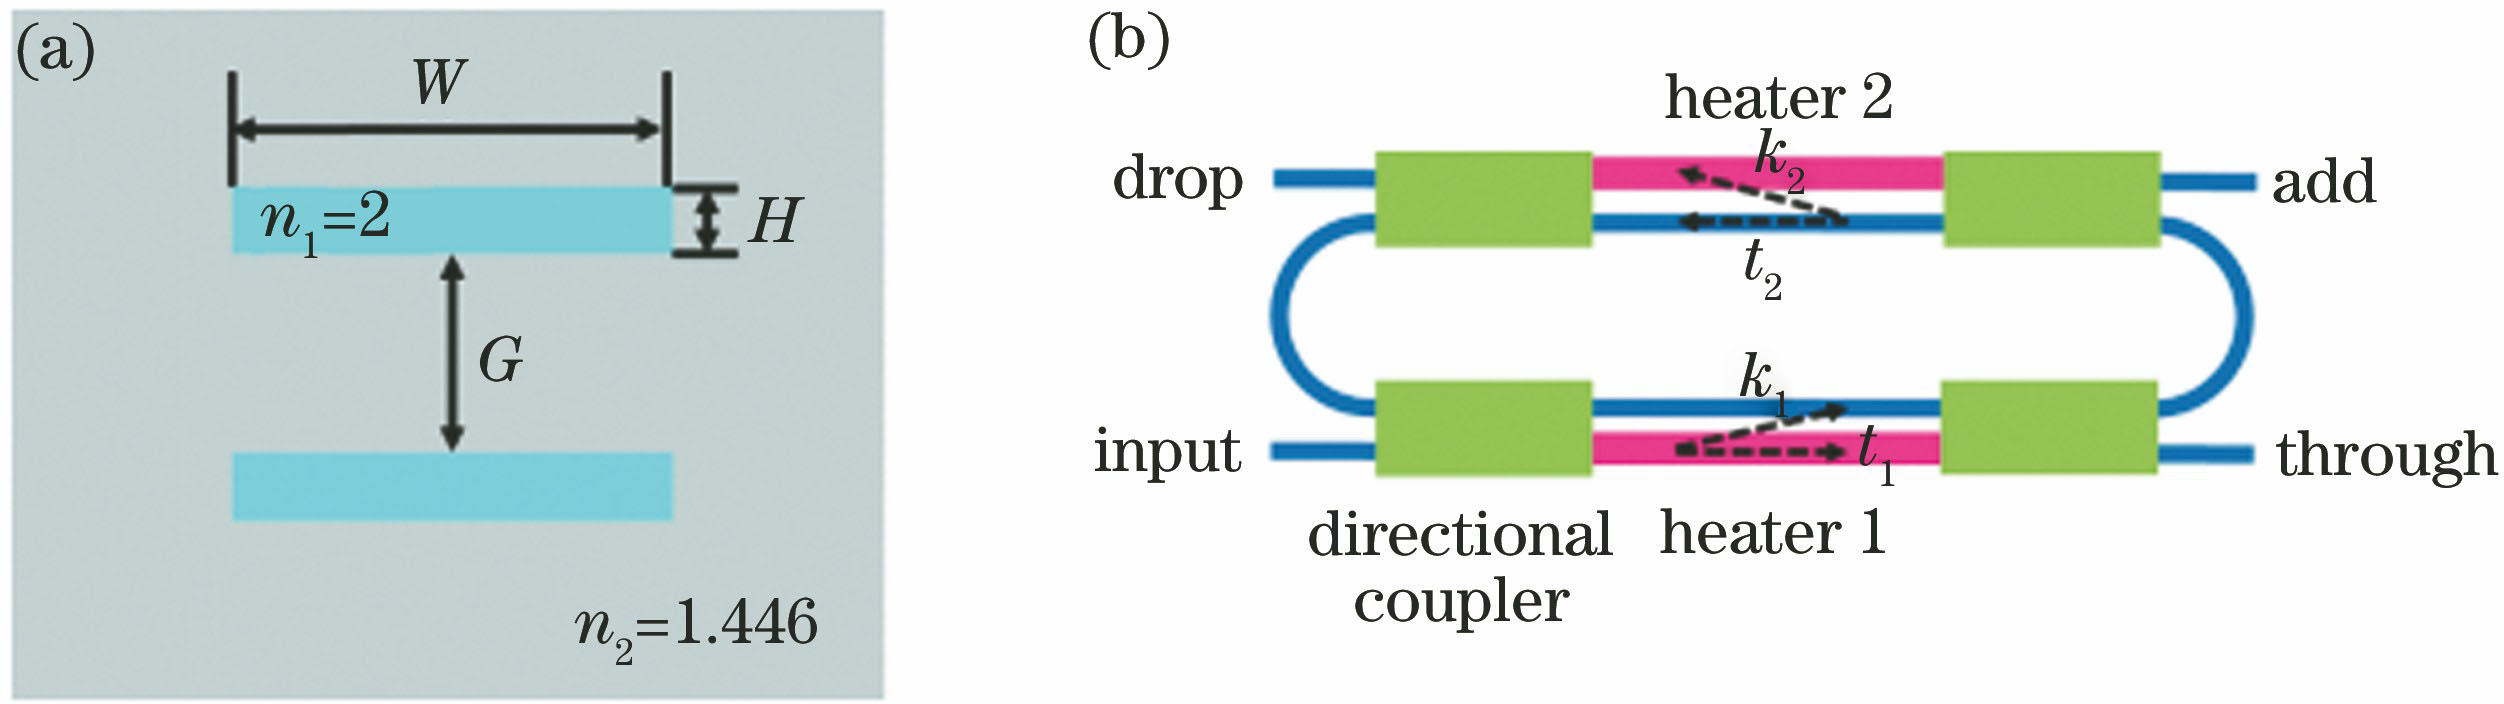 Add-Drop microring resonator based on MZI structure. (a) Waveguide cross-section of double stripe silicon nitride waveguide; (b) schematic of microring resonator